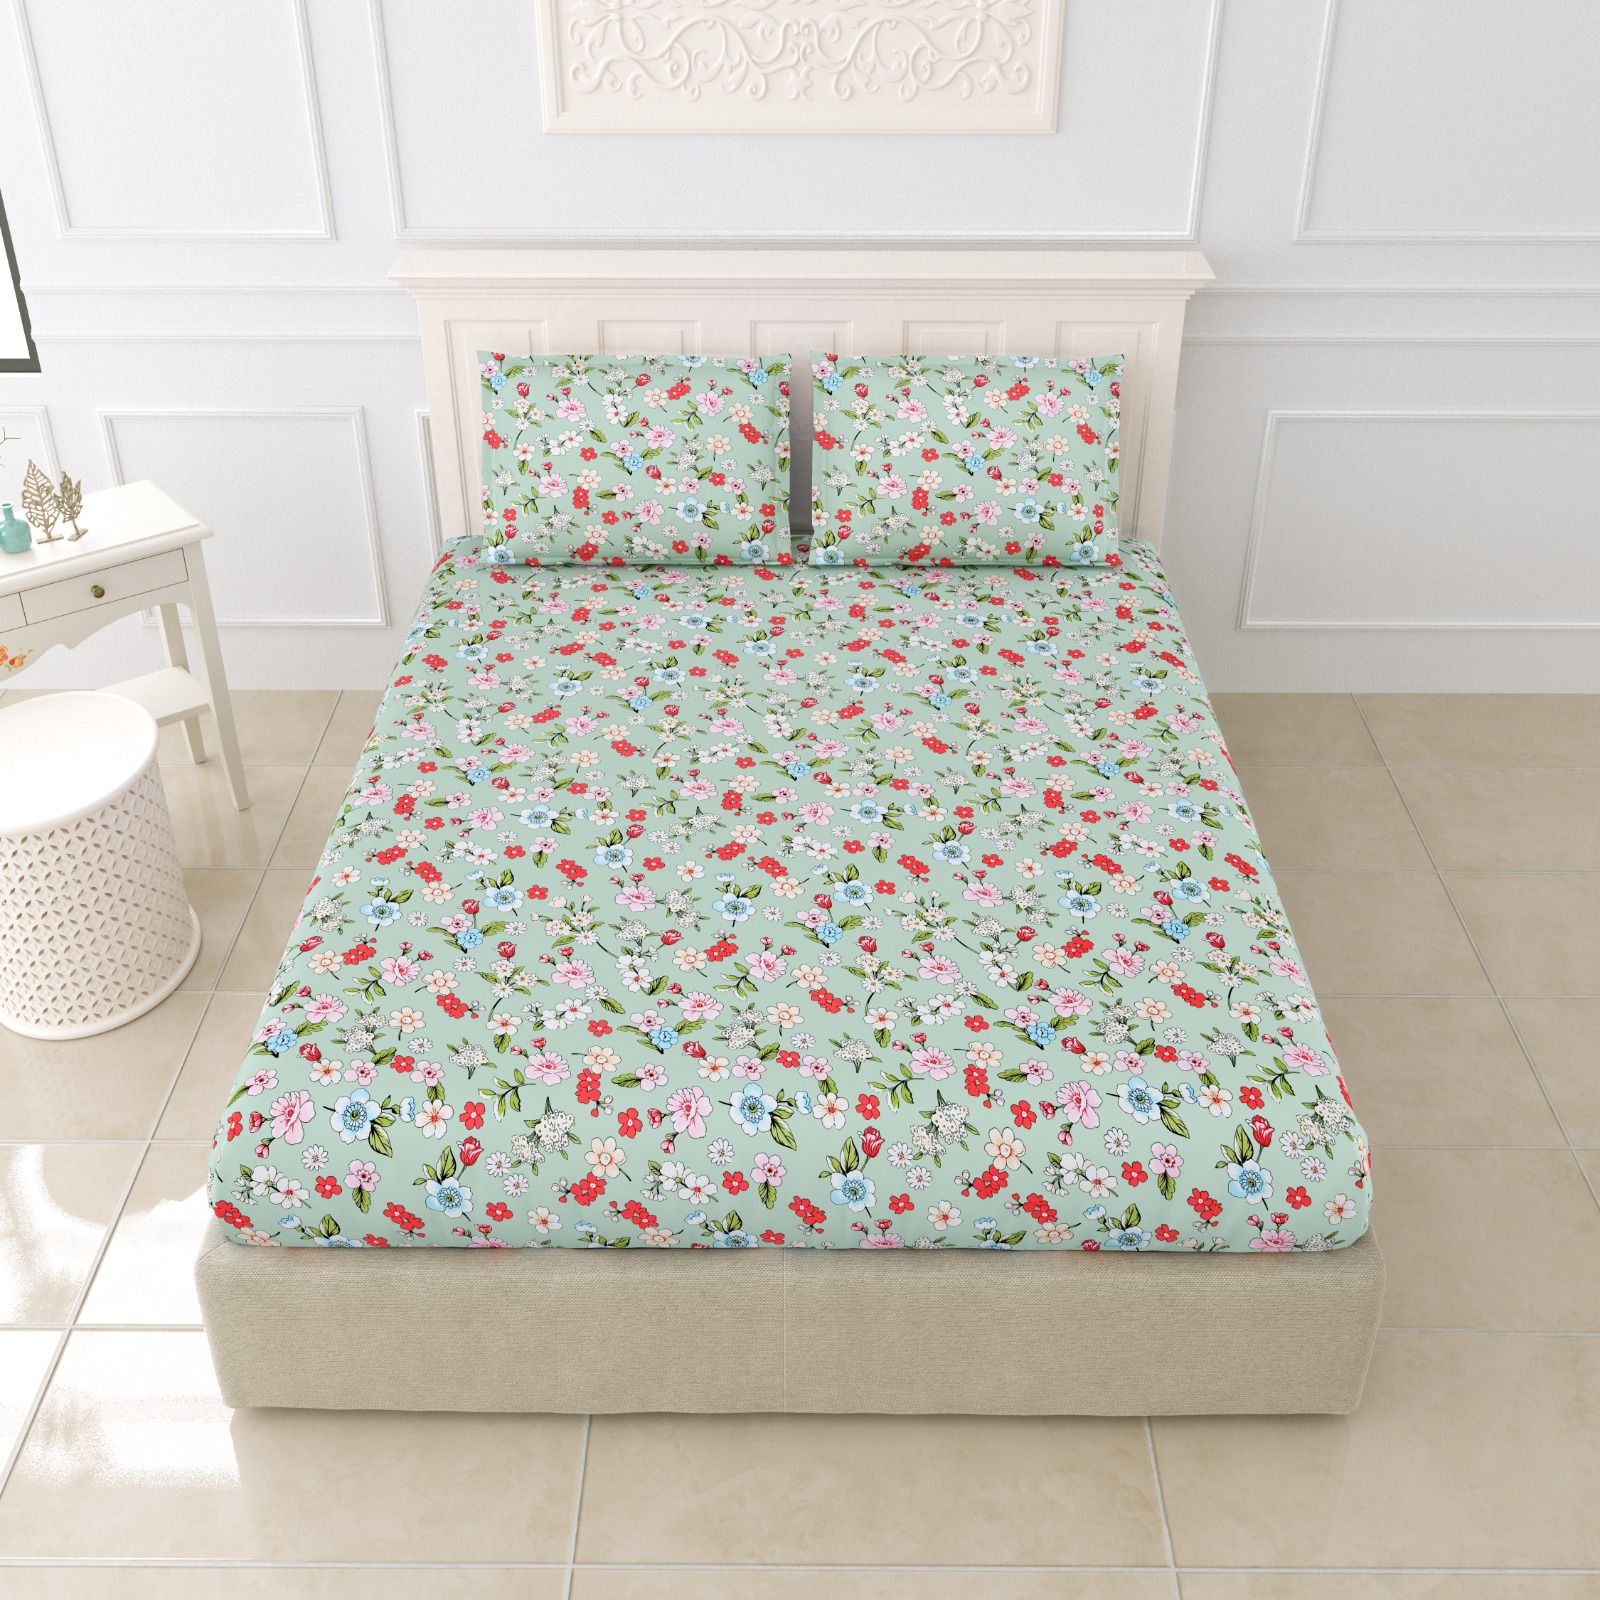 Cotton Floral Single Bed Sheet With Pillow Cover